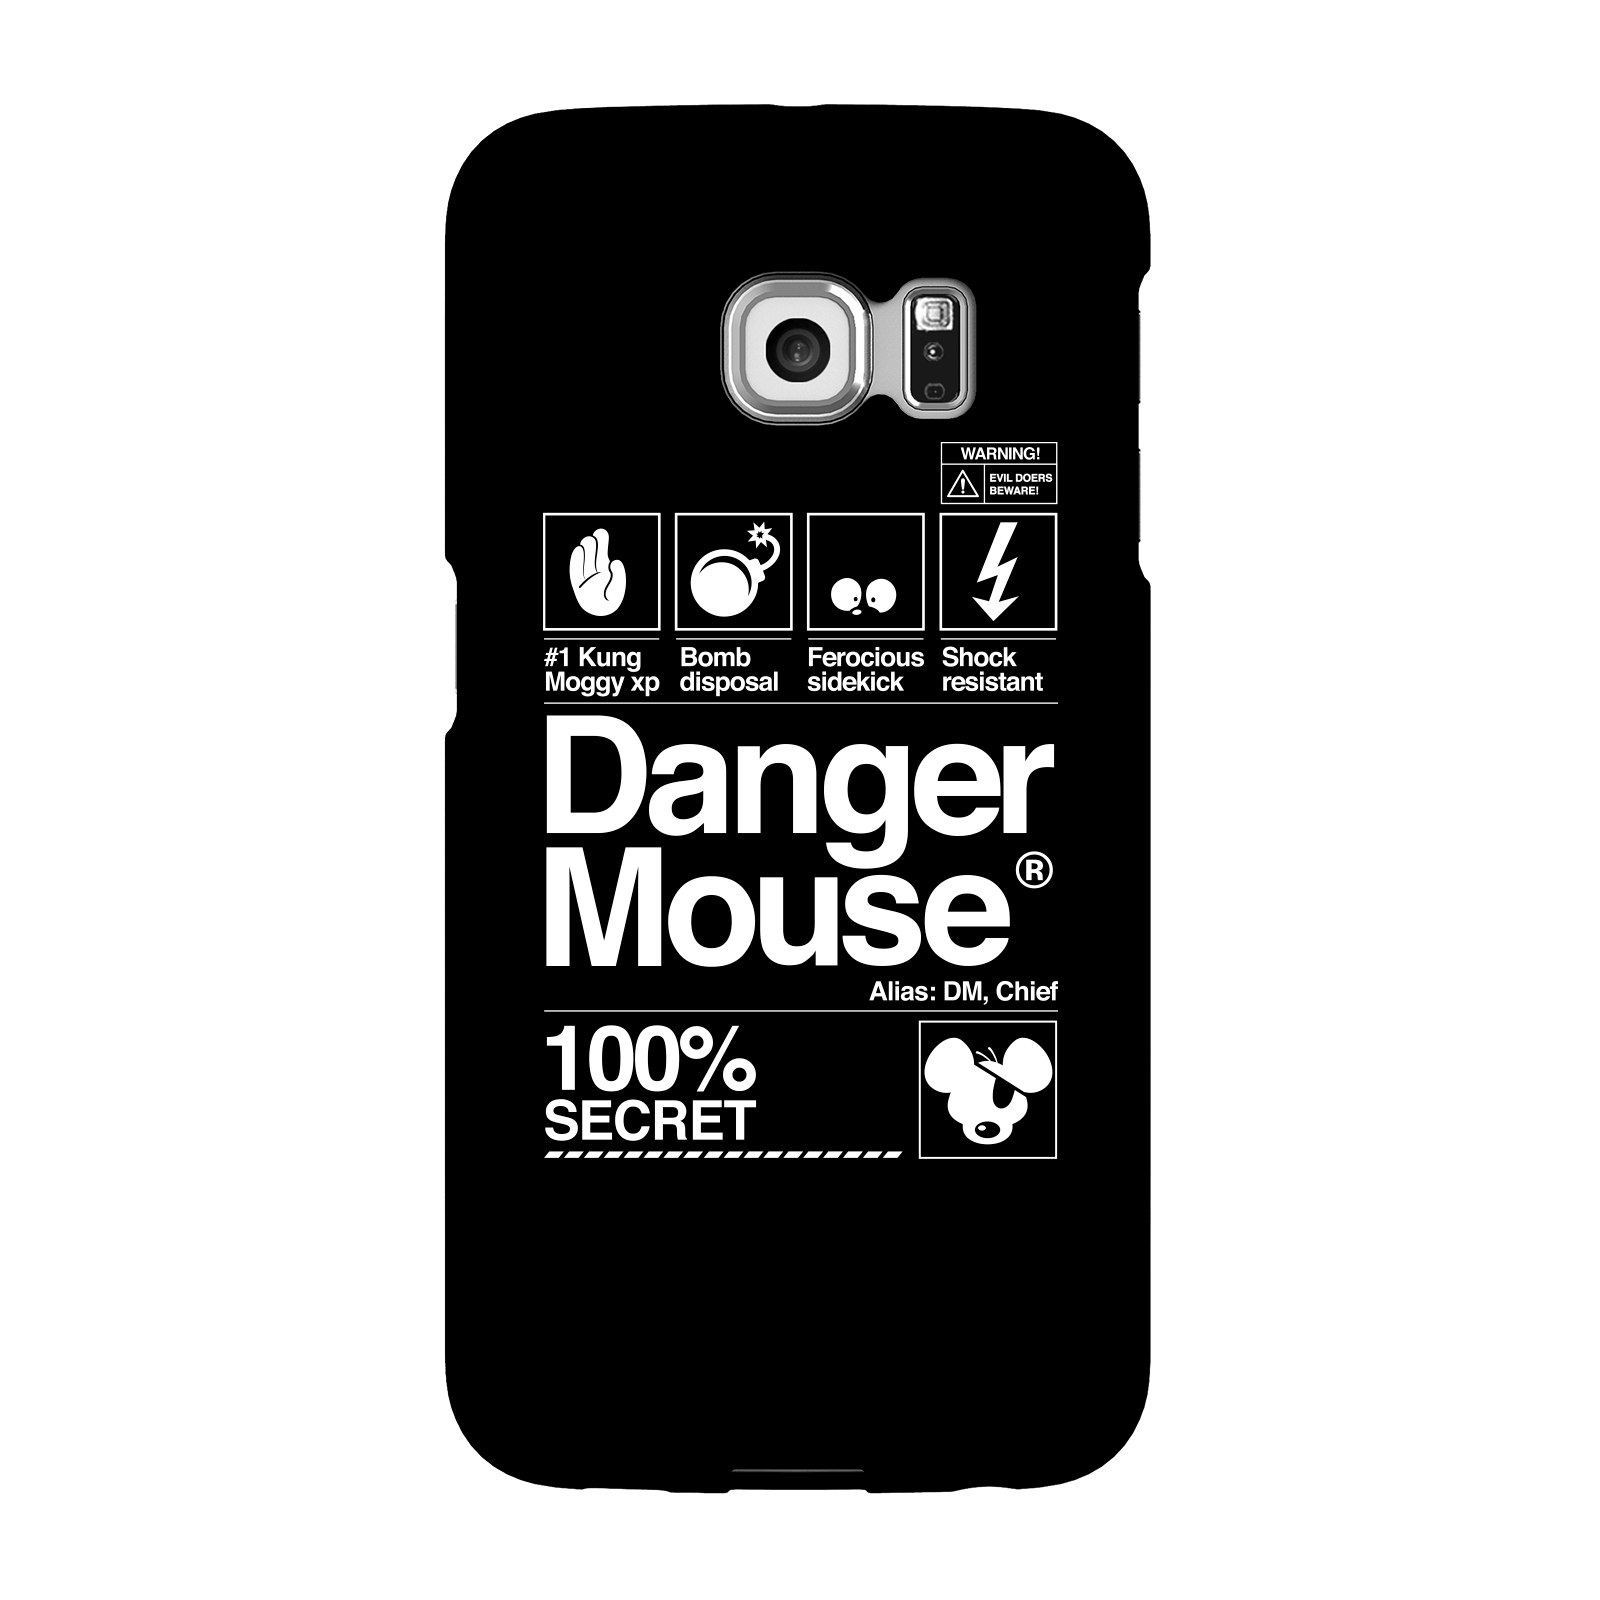 Danger Mouse 100% Secret Phone Case for iPhone and Android - Samsung S6 Edge - Snap Case - Gloss